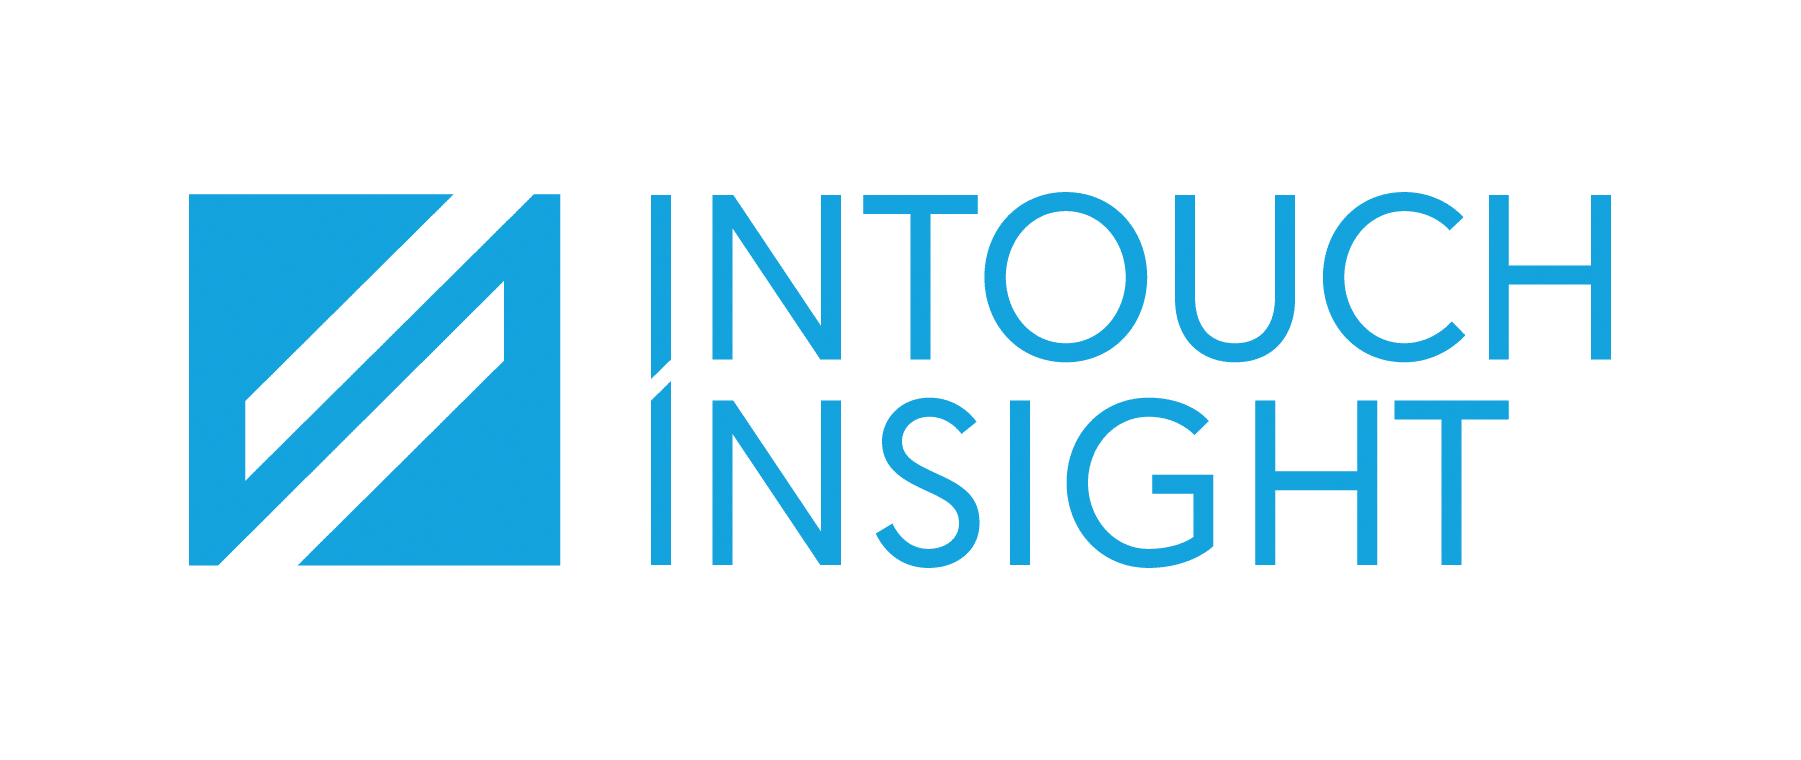 INTOUCH INSIGHT logo